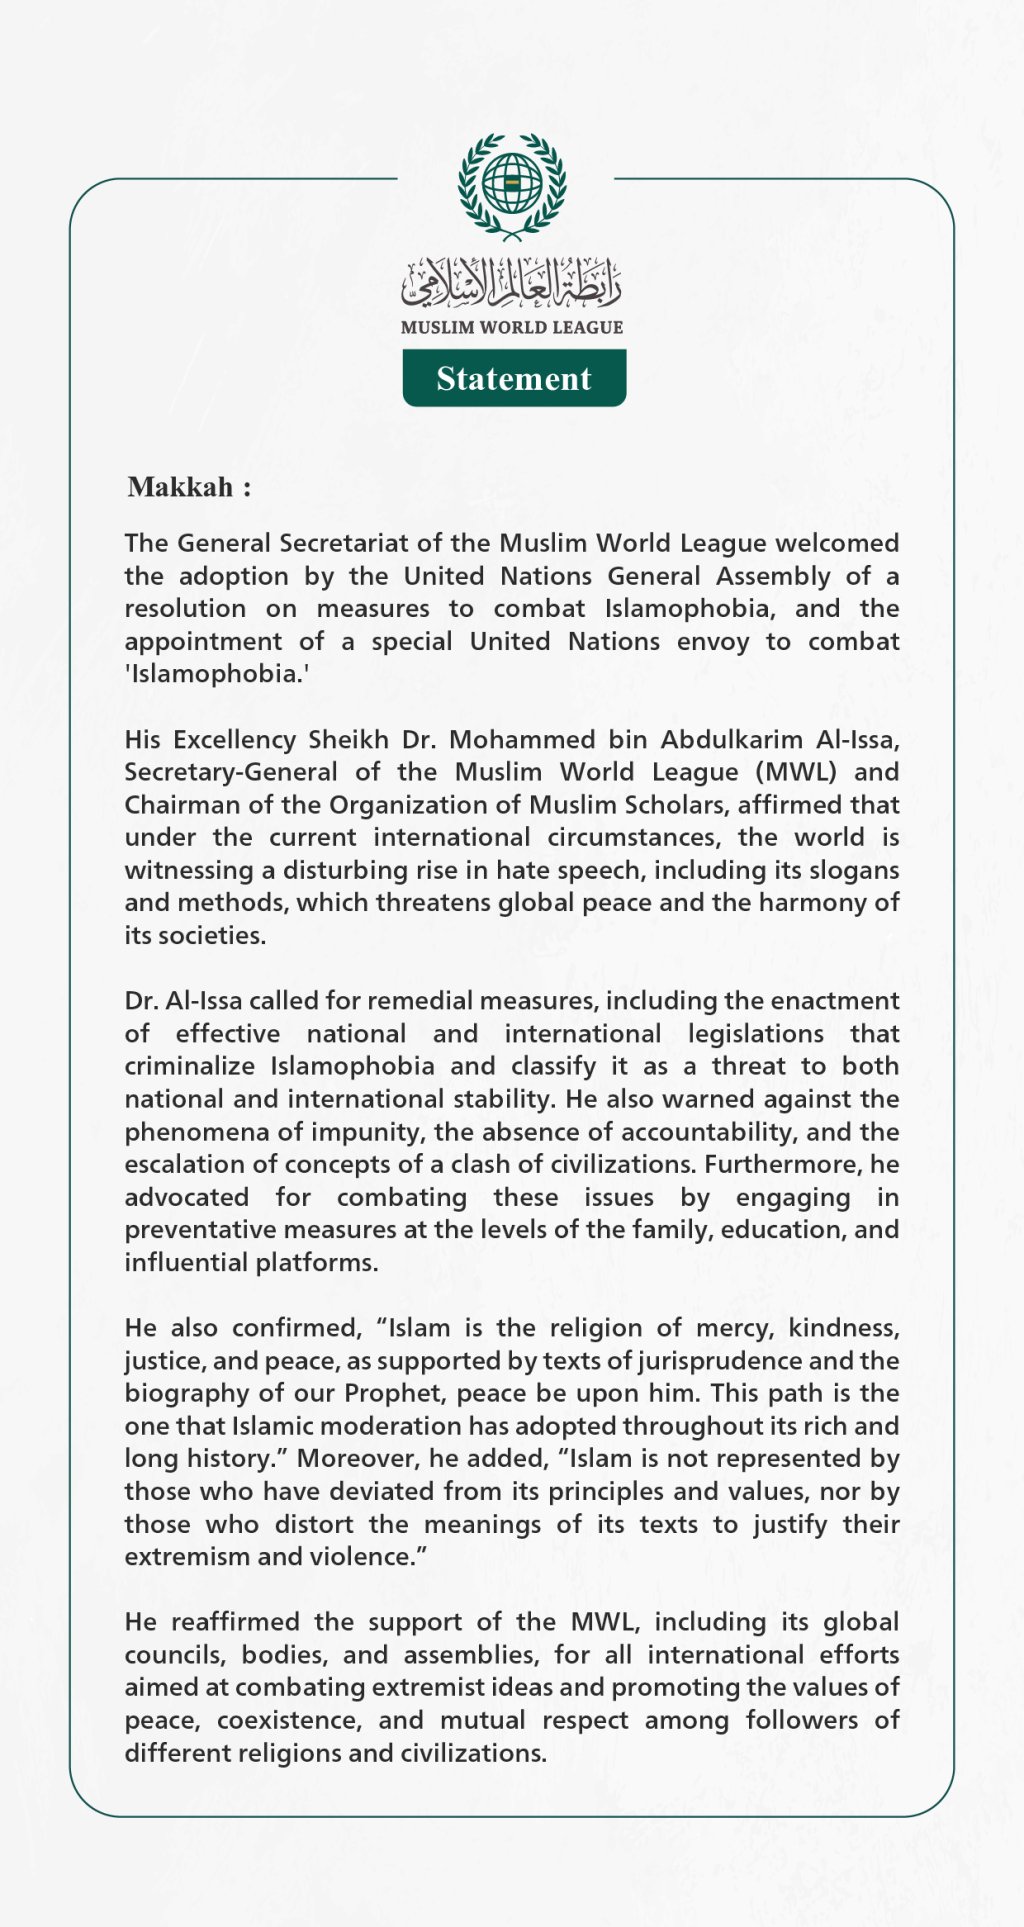 The Muslim World League Welcomes the Appointment of a United Nations Special Envoy to Combat Islamophobia